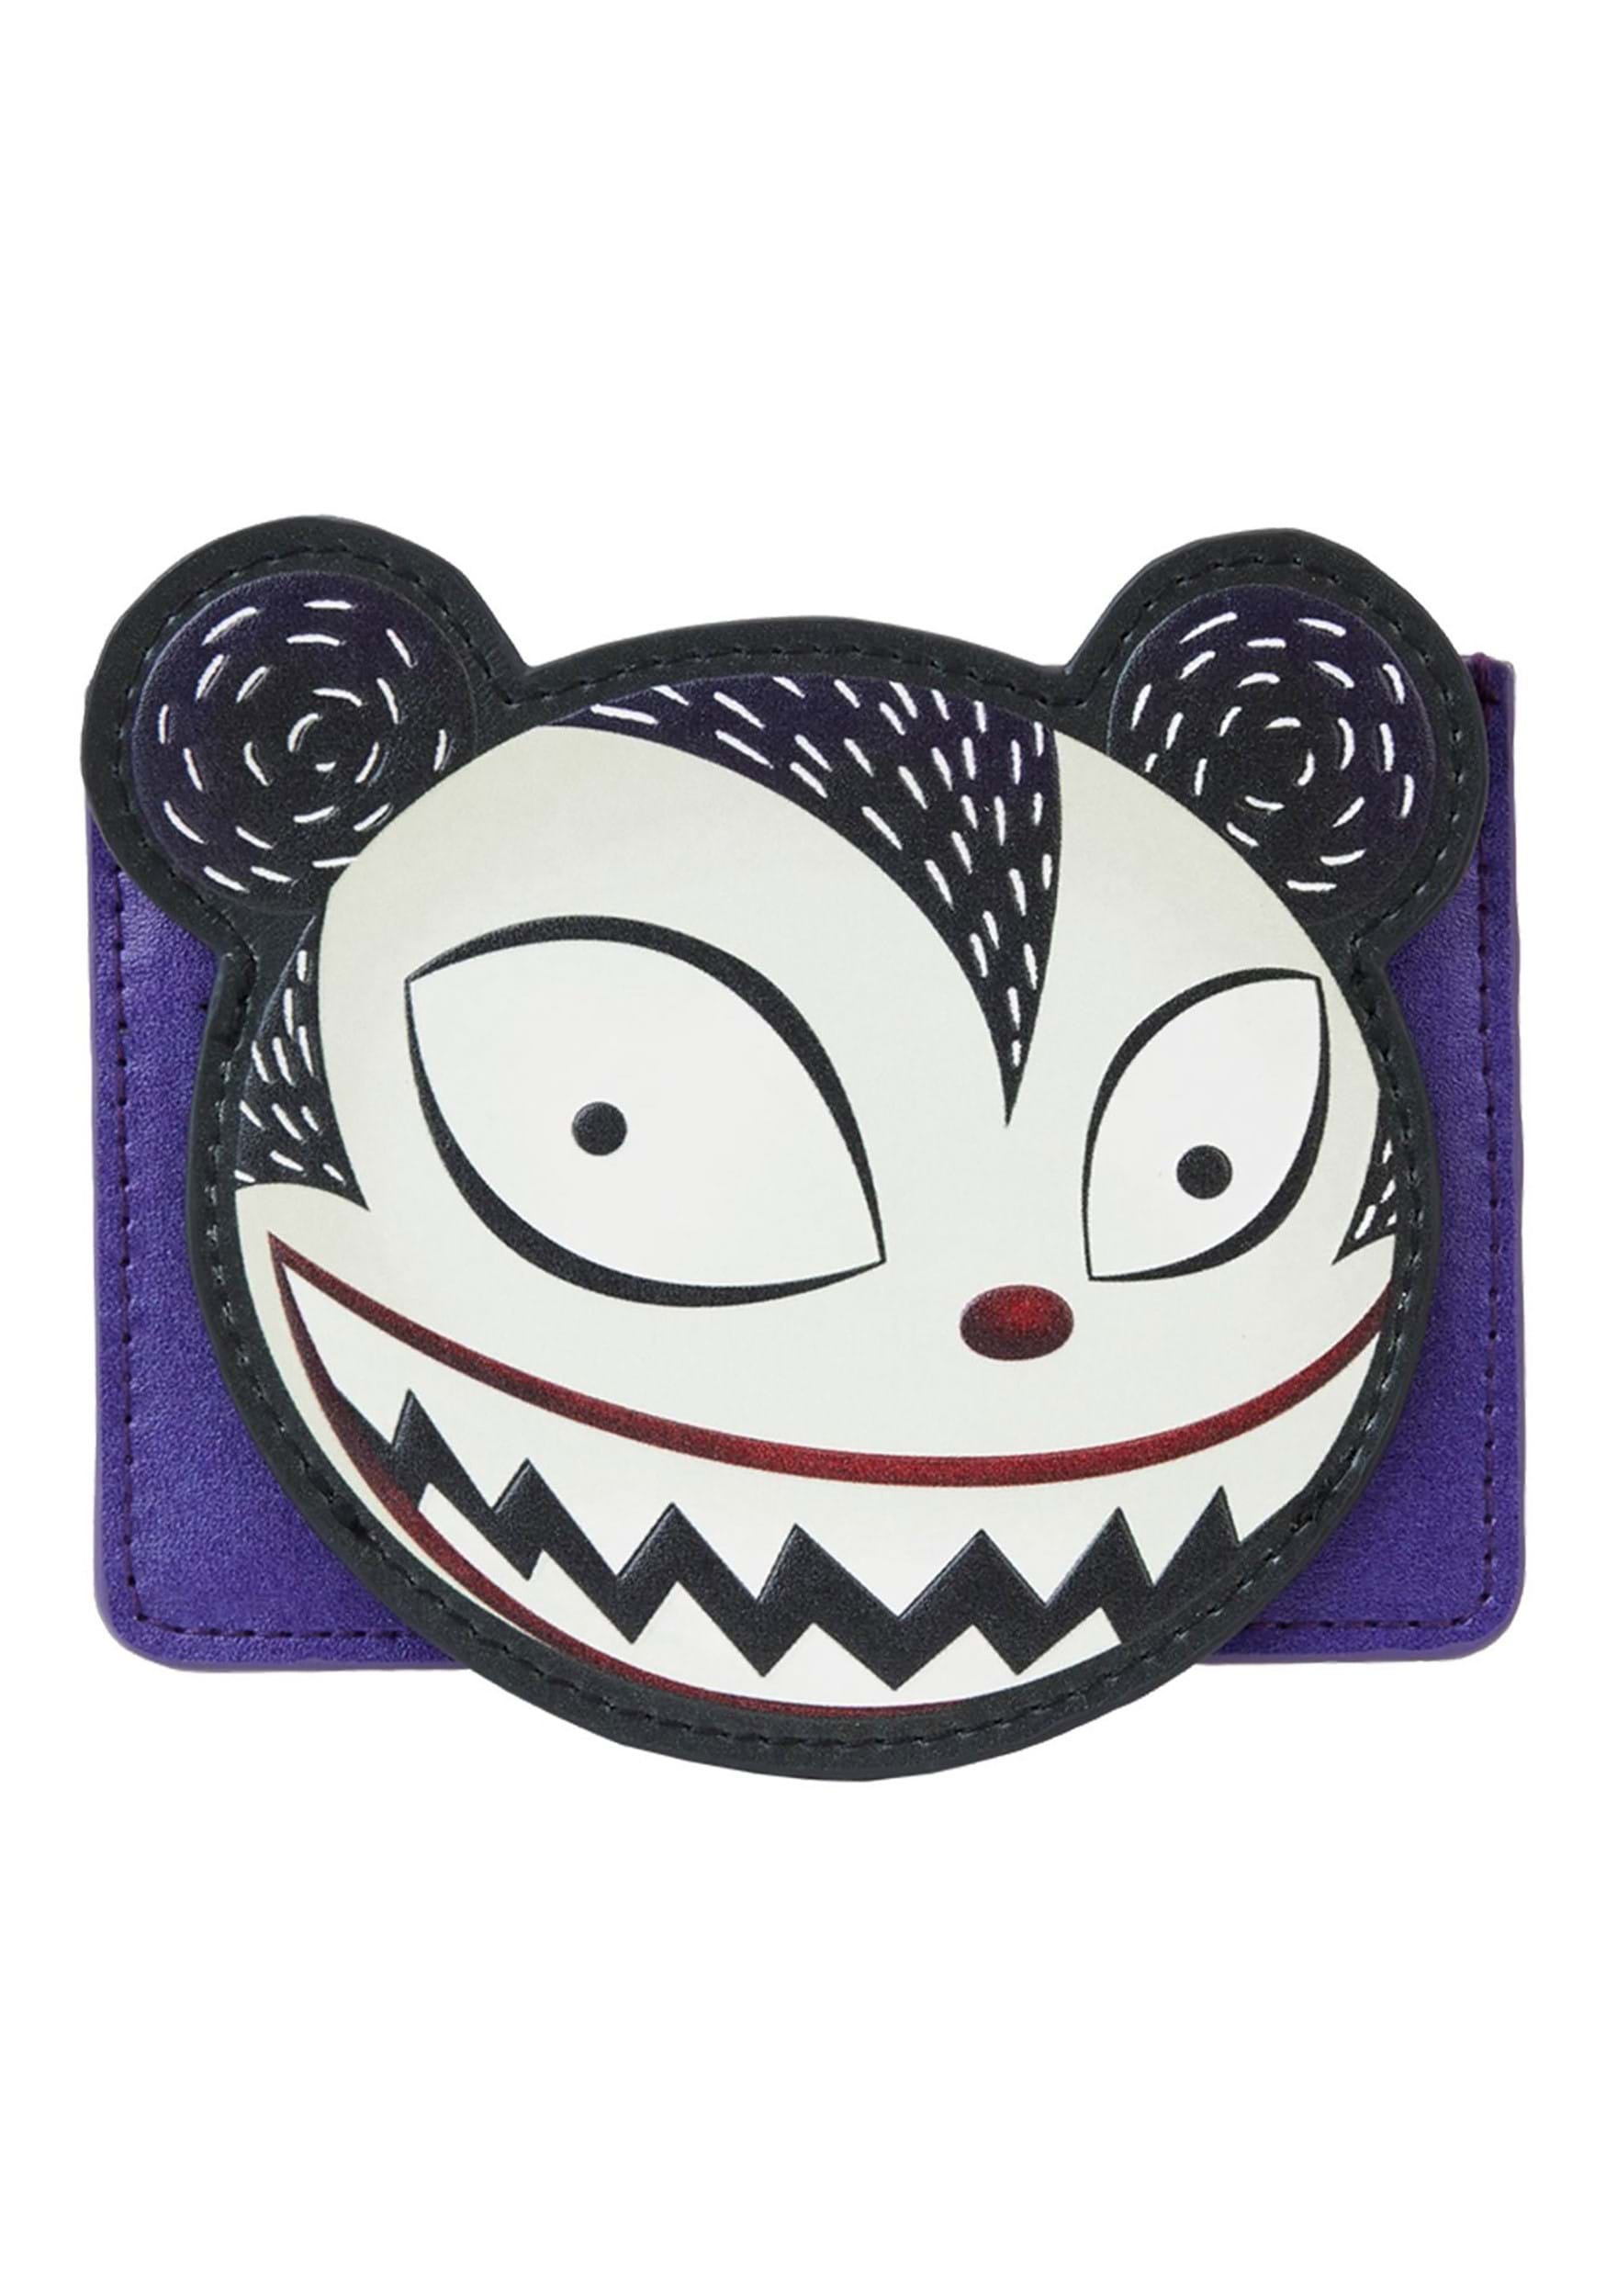 Nightmare Before Christmas Scary Teddy Cardholder by Loungefly